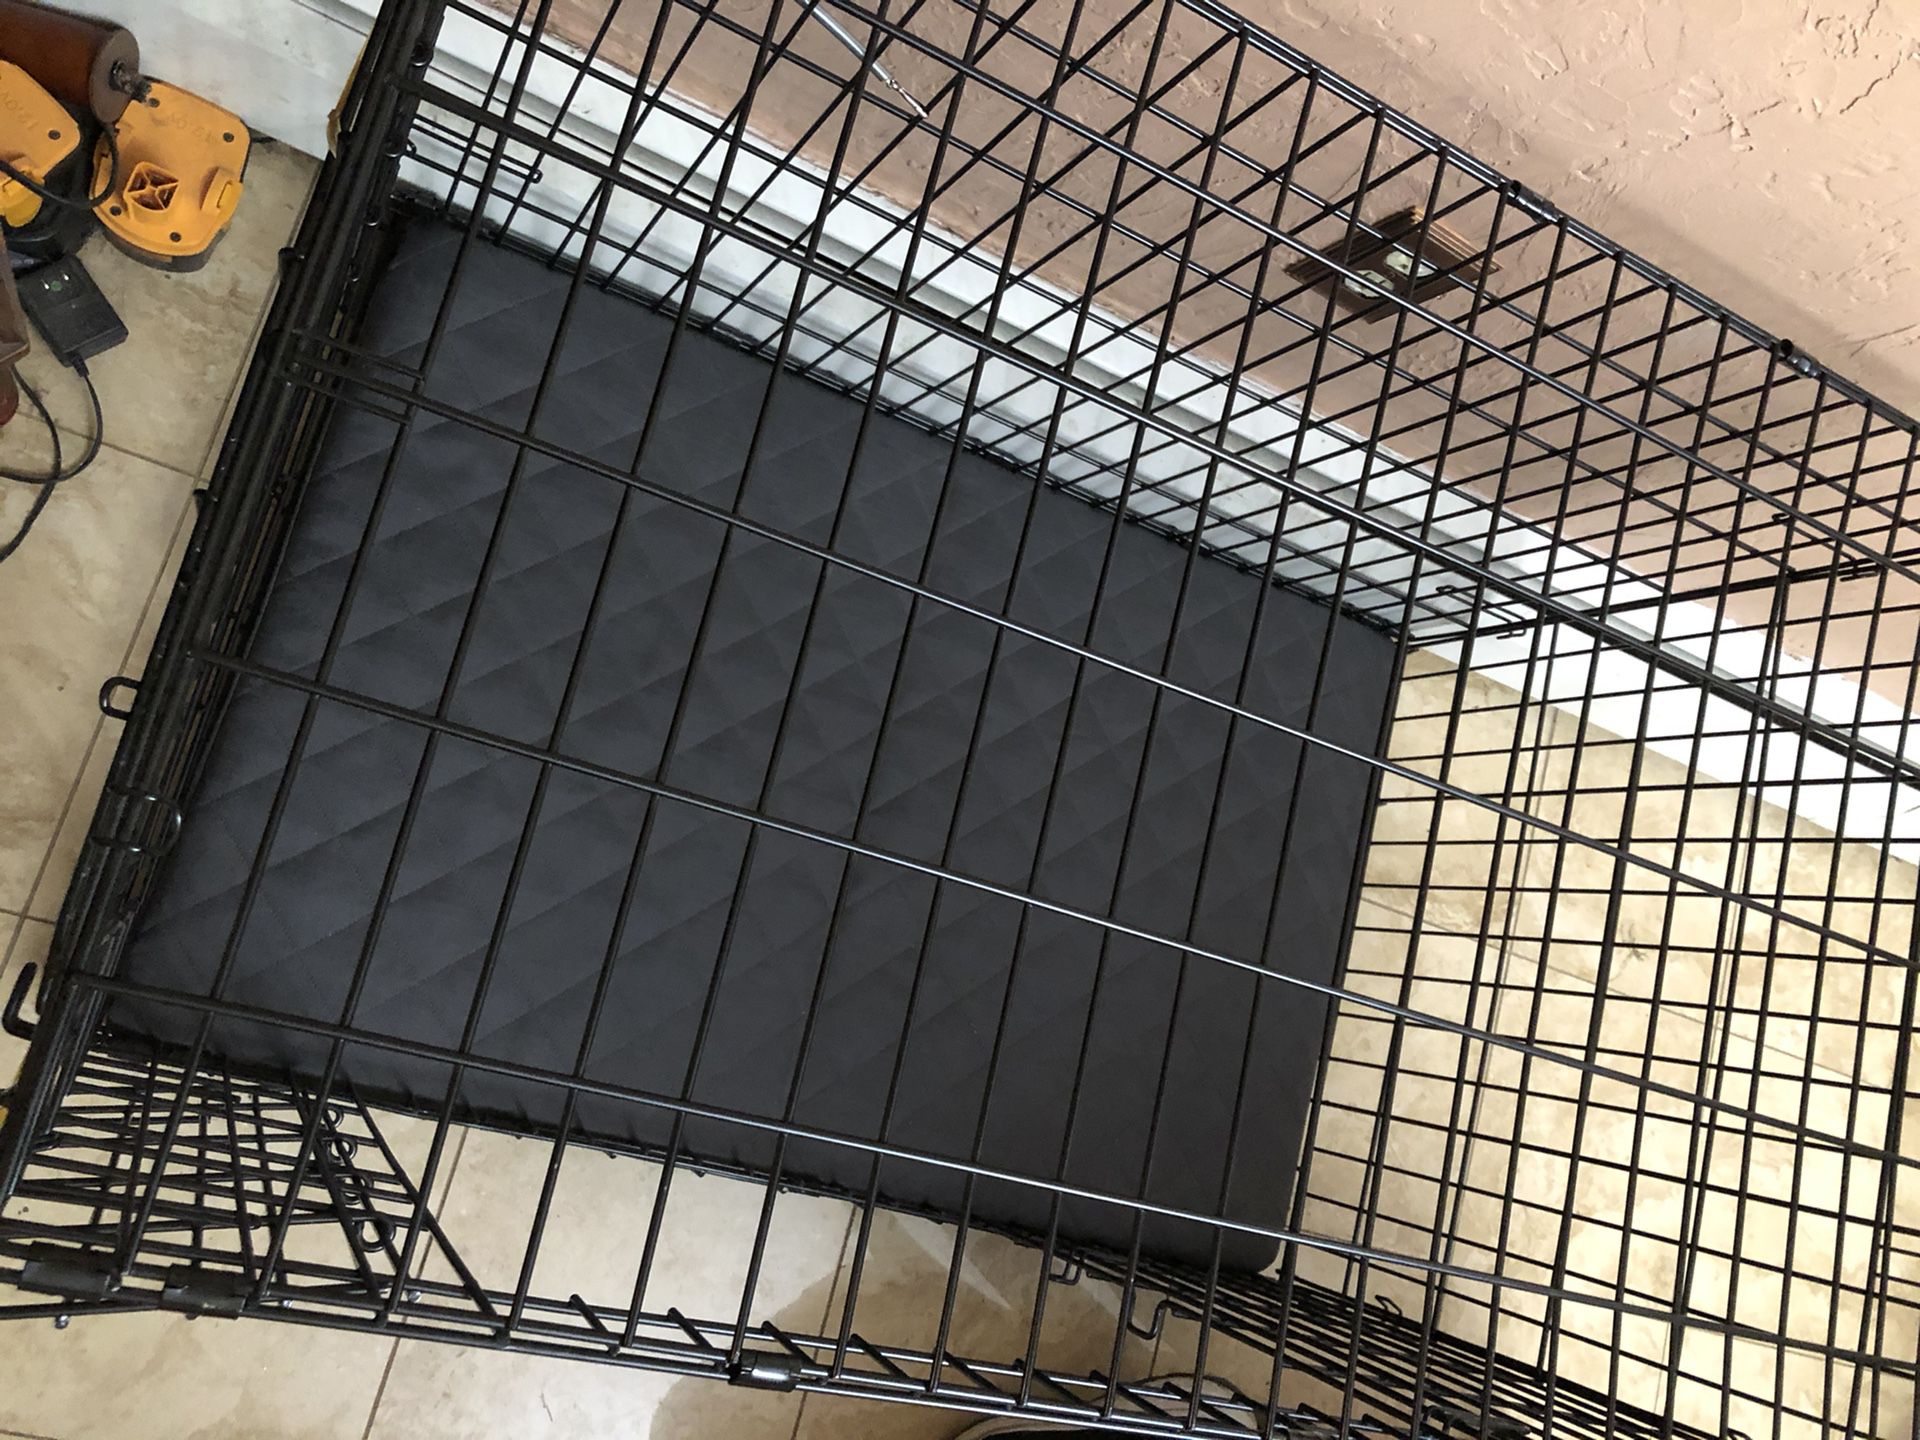 Brand new used once! Dog crate